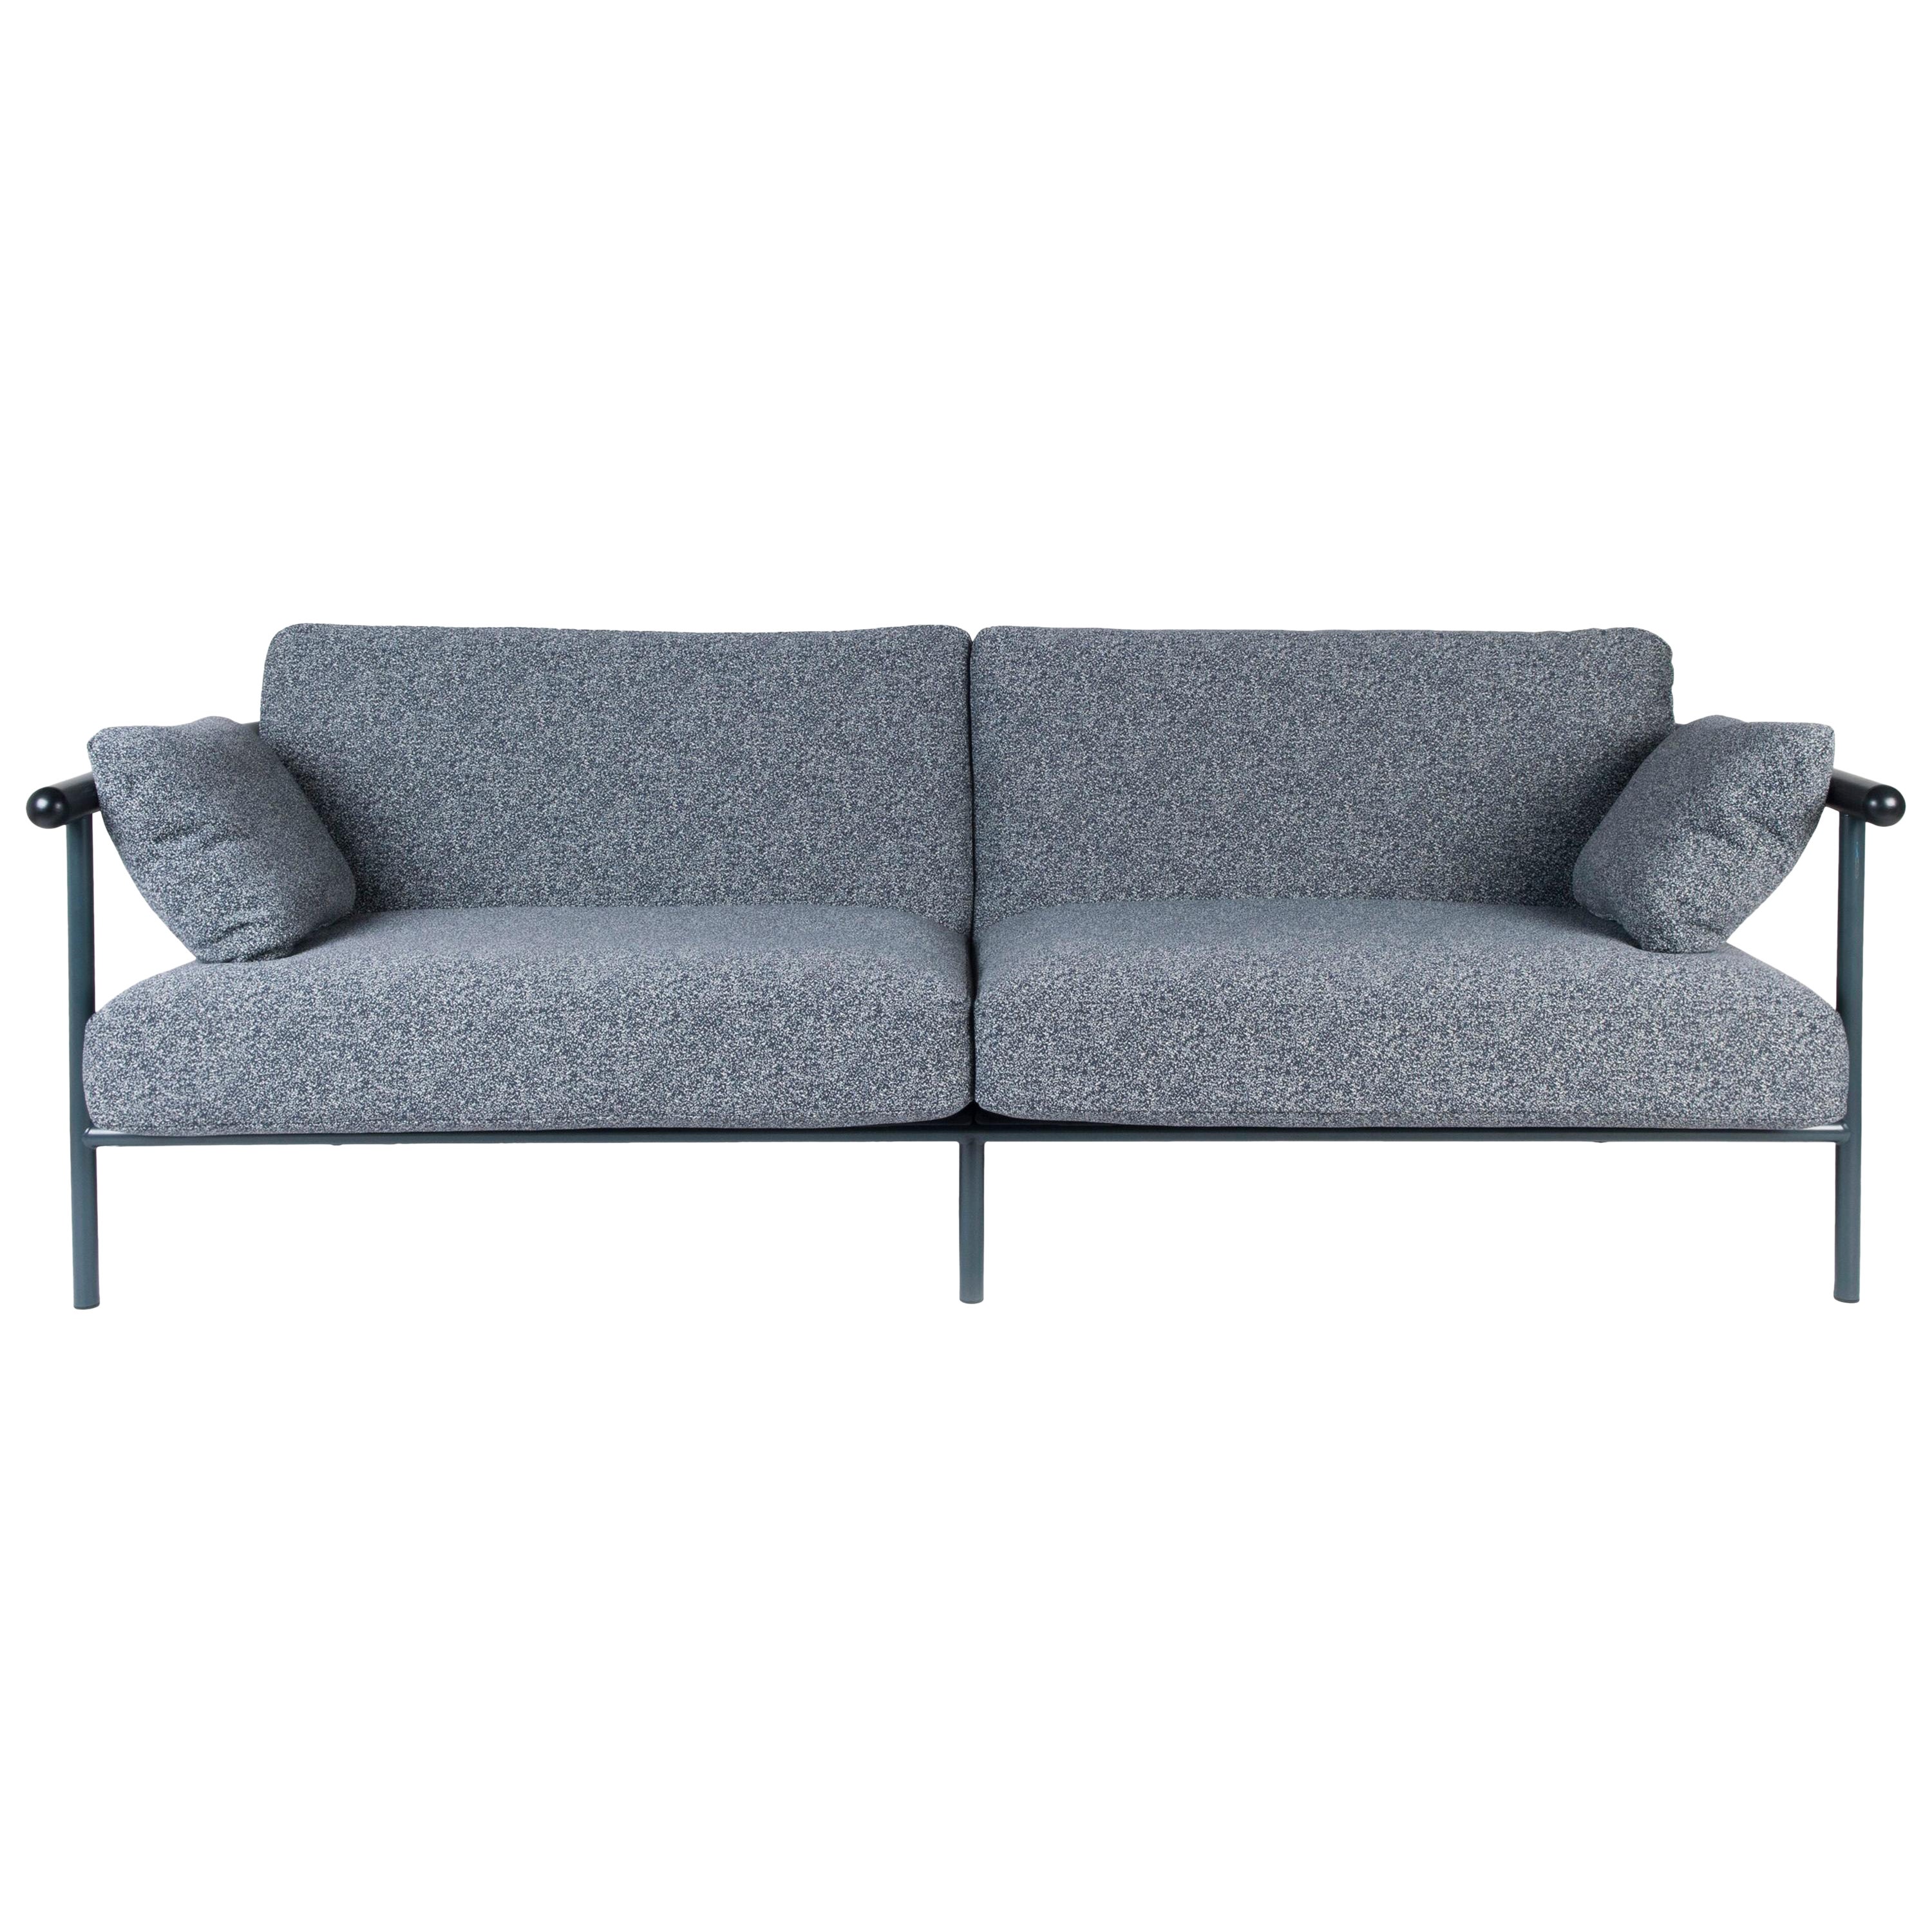 Upholstered "X-Rays" Sofa, Alain Gilles For Sale